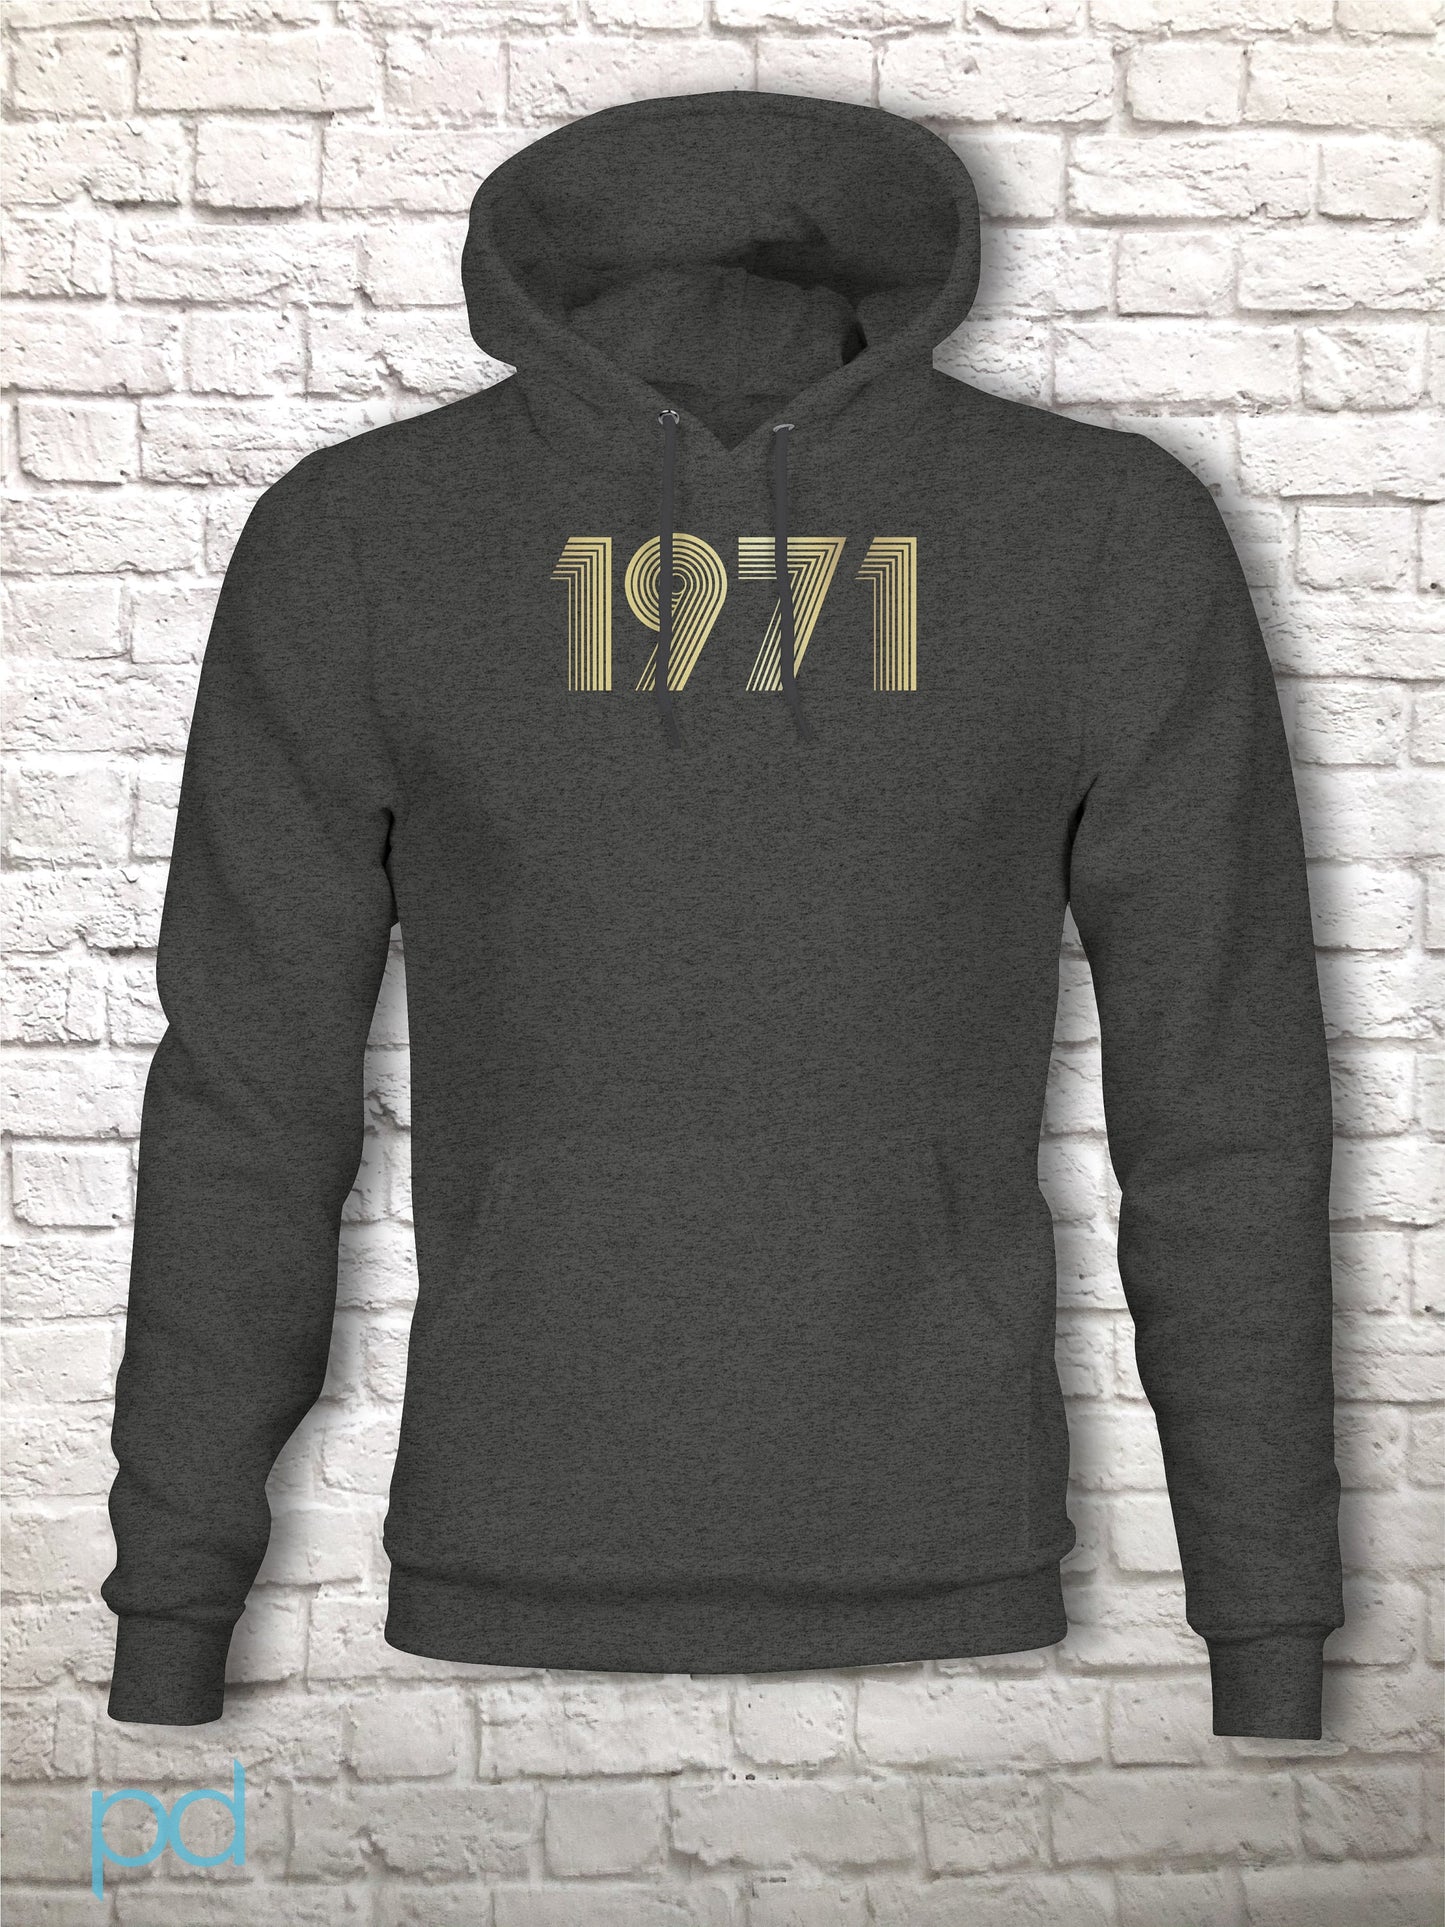 1971 Hoodie Metallic Gold or Silver Foil, 51st Birthday Gift Pullover Hoody in Retro & Vintage 70s style, Fiftieth Unisex Hooded Jumper Top